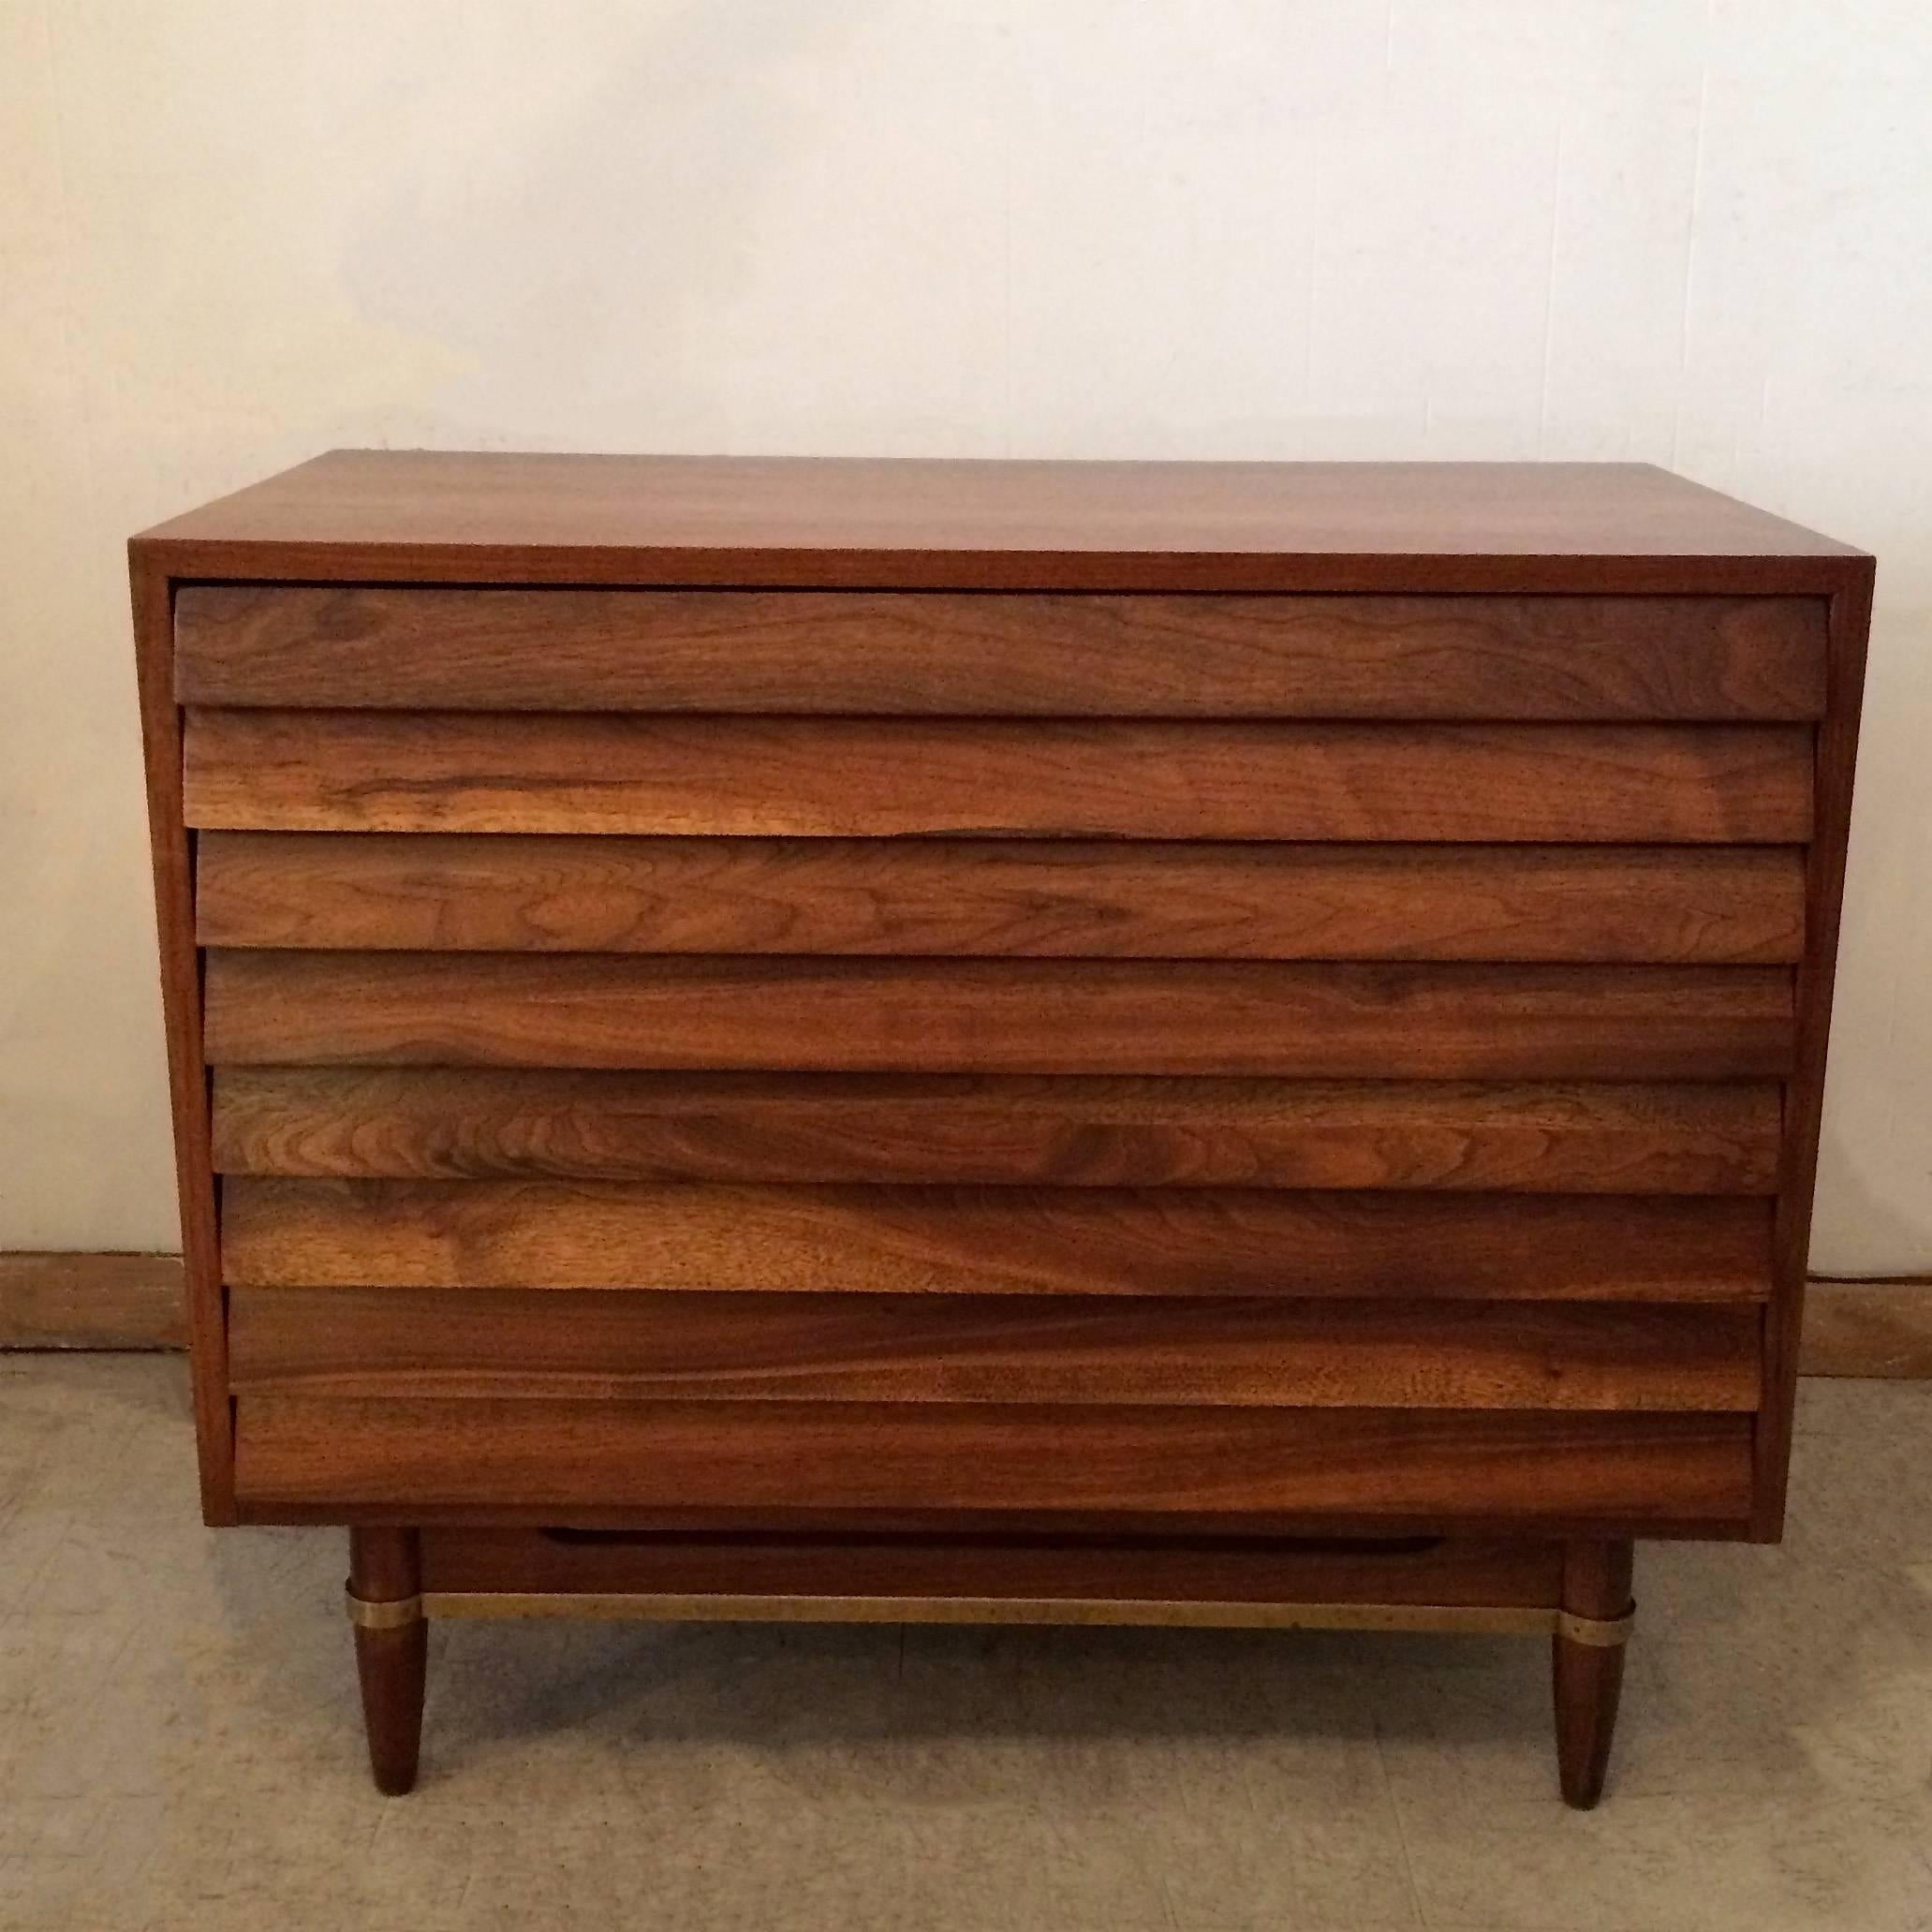 Mid-Century Modern, 3 drawer, walnut dresser with brass accents by Merton Gershon for American’s of Martinsville features a louvered front. The companion American Of Martinsville dresser shown is listed separately. 